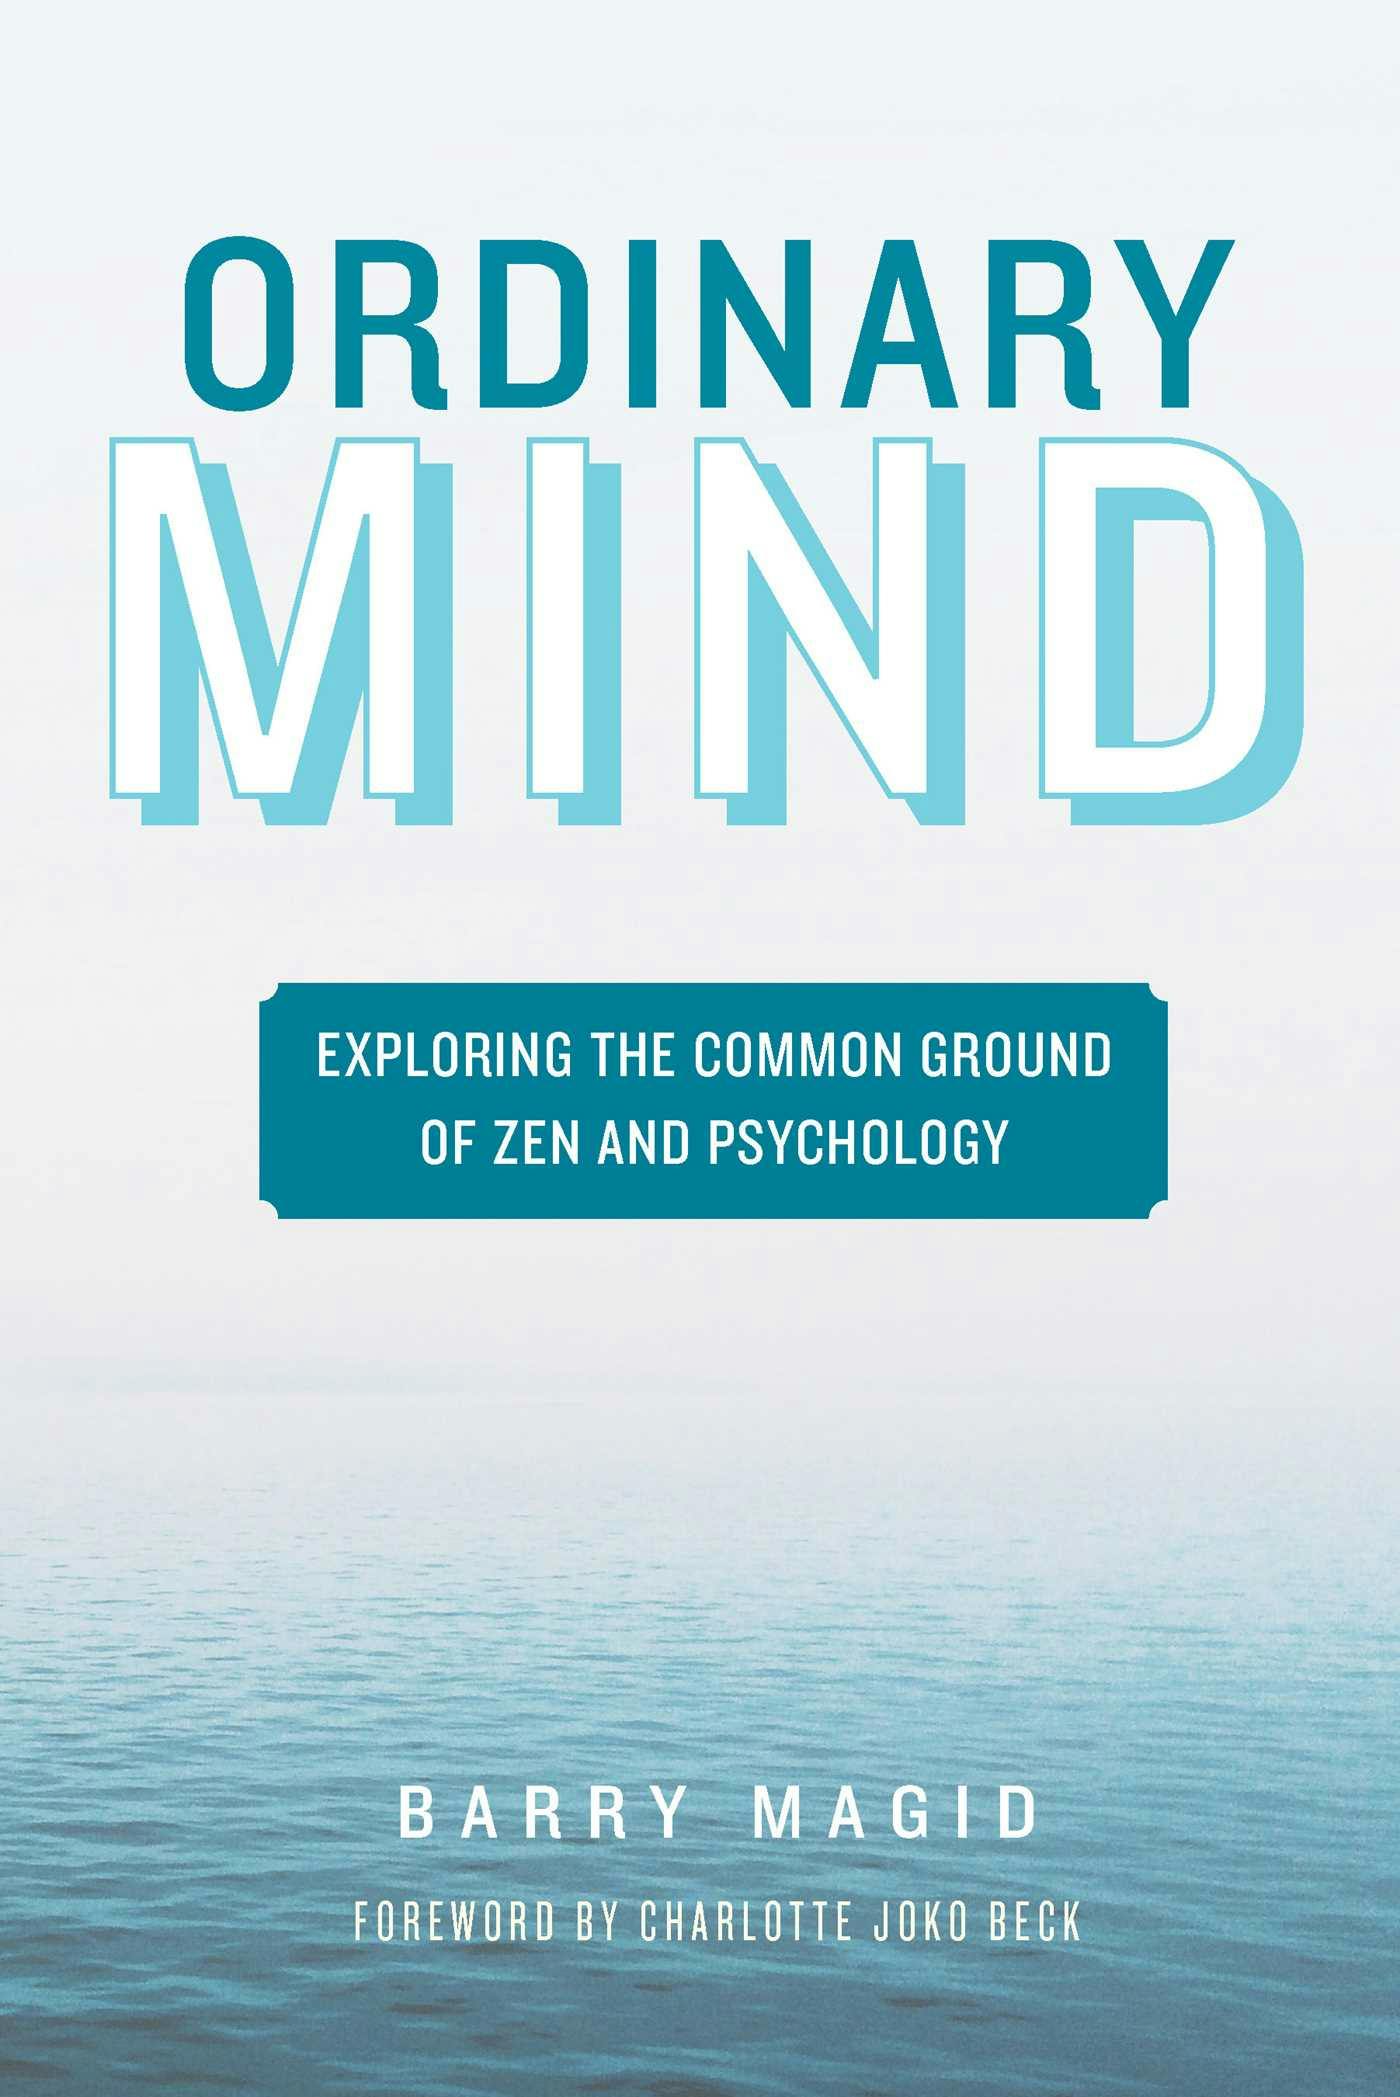 Ordinary Mind: Exploring the Common Ground of Zen and Psychoanalysis - undefined